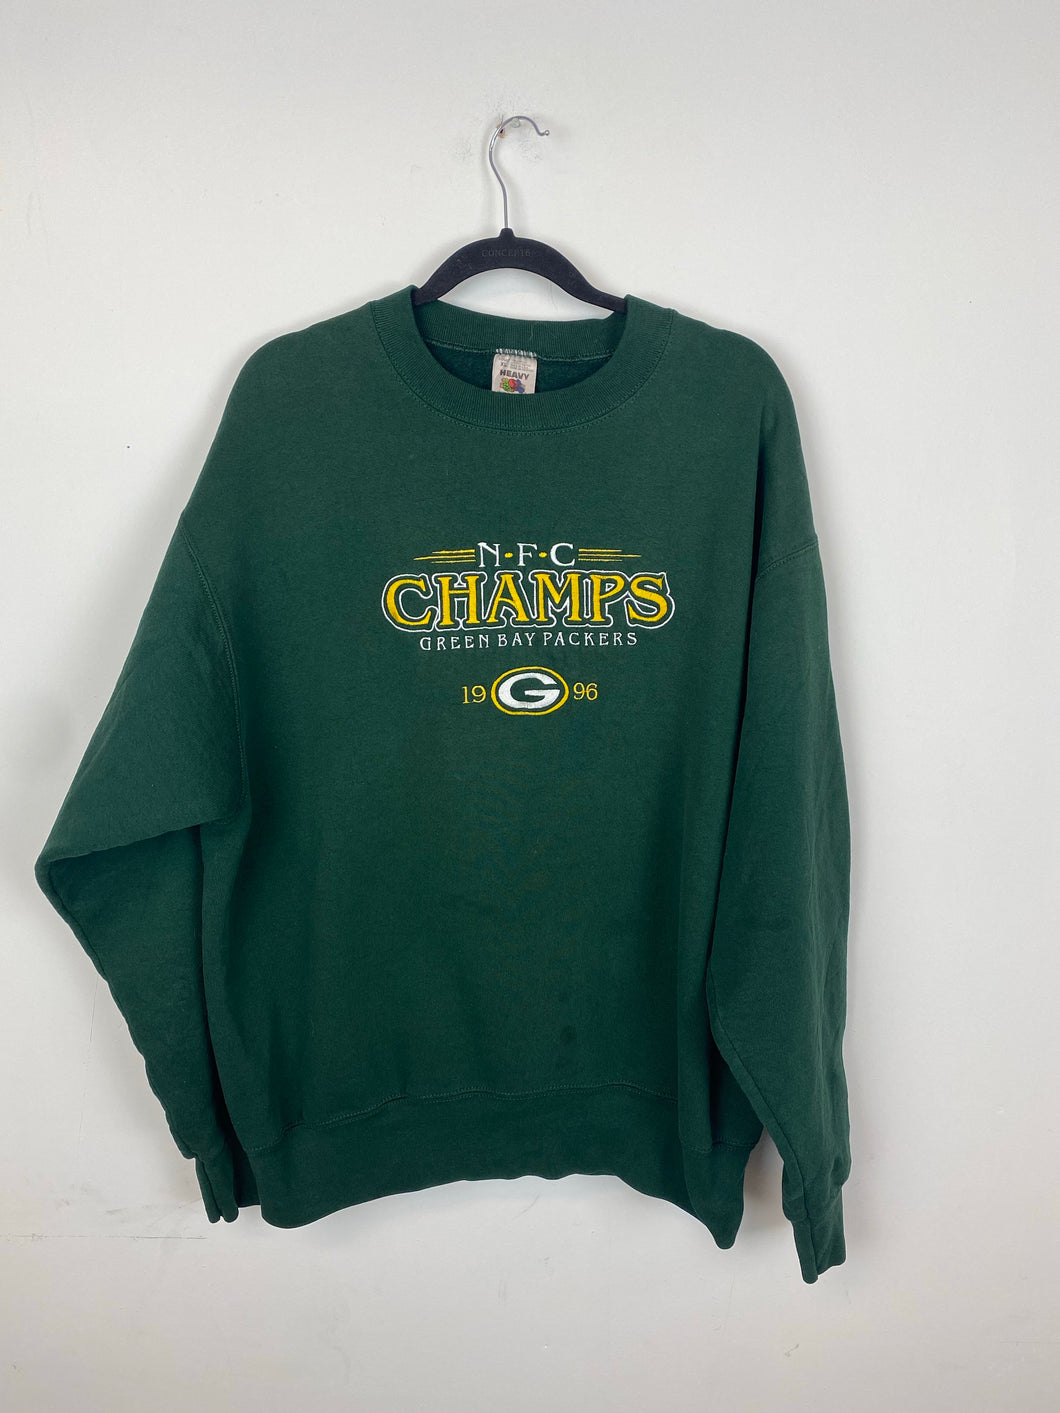 Vintage embroidered Green Bay Packers crewneck - L